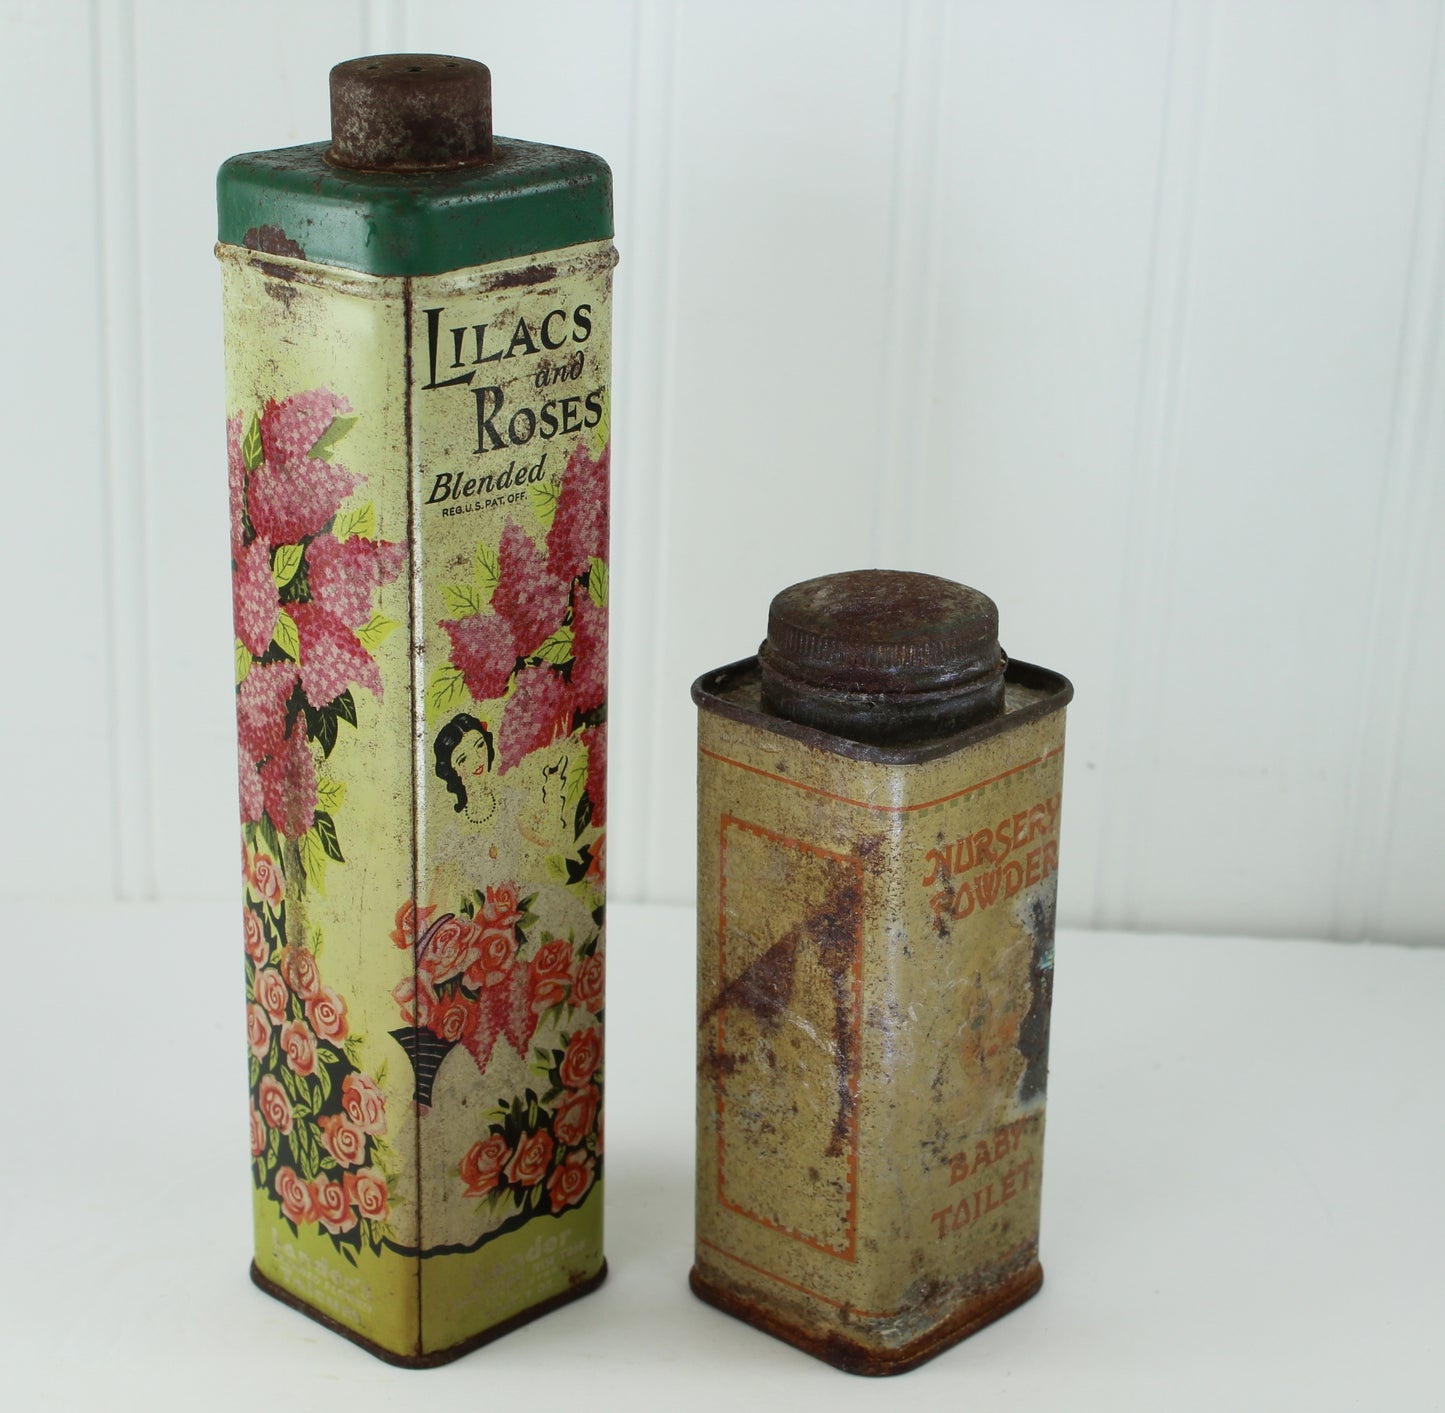 Old Vintage Decorative Tin Boxes Powder Lilacs Roses & Nursery Borated Baby Powder old tins floral decoration